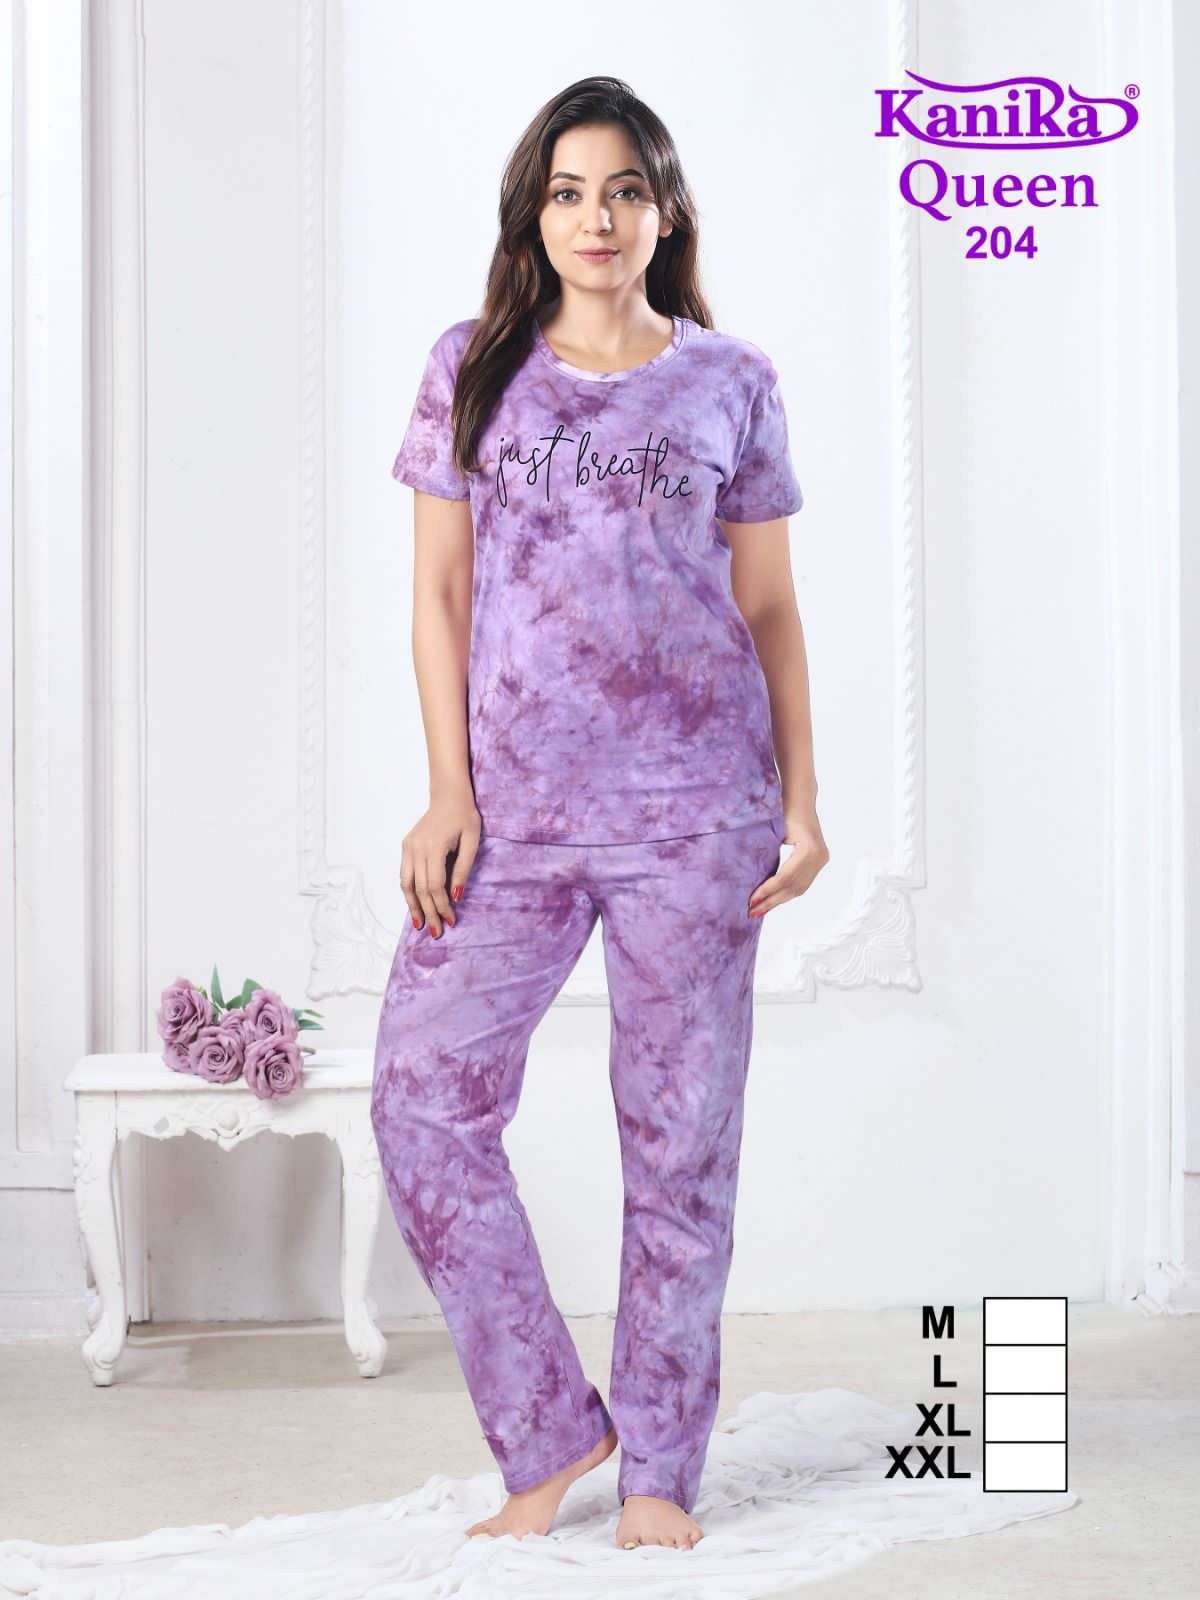 introducing new range of night suits kanika presents queen vol 2 cotton hosiery soft finish a blend of light and dark tie and dye night suit for womens 